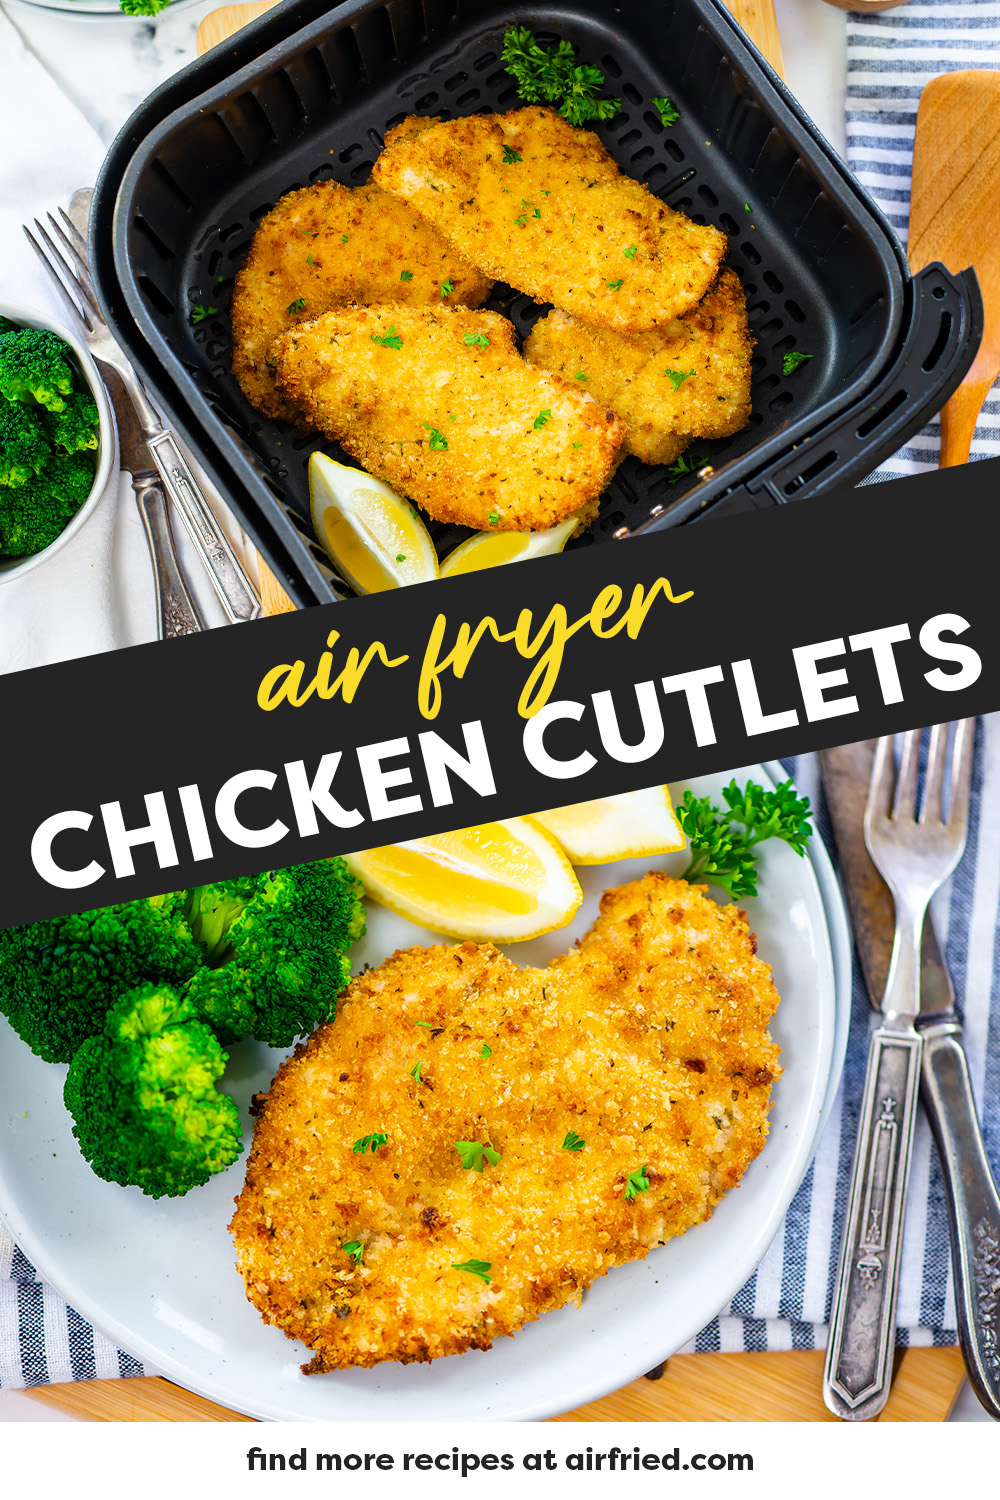 These air fried chicken cutlets come out of your air fryer with a lightly seasoned, crispy breading and a juicy, tender center!